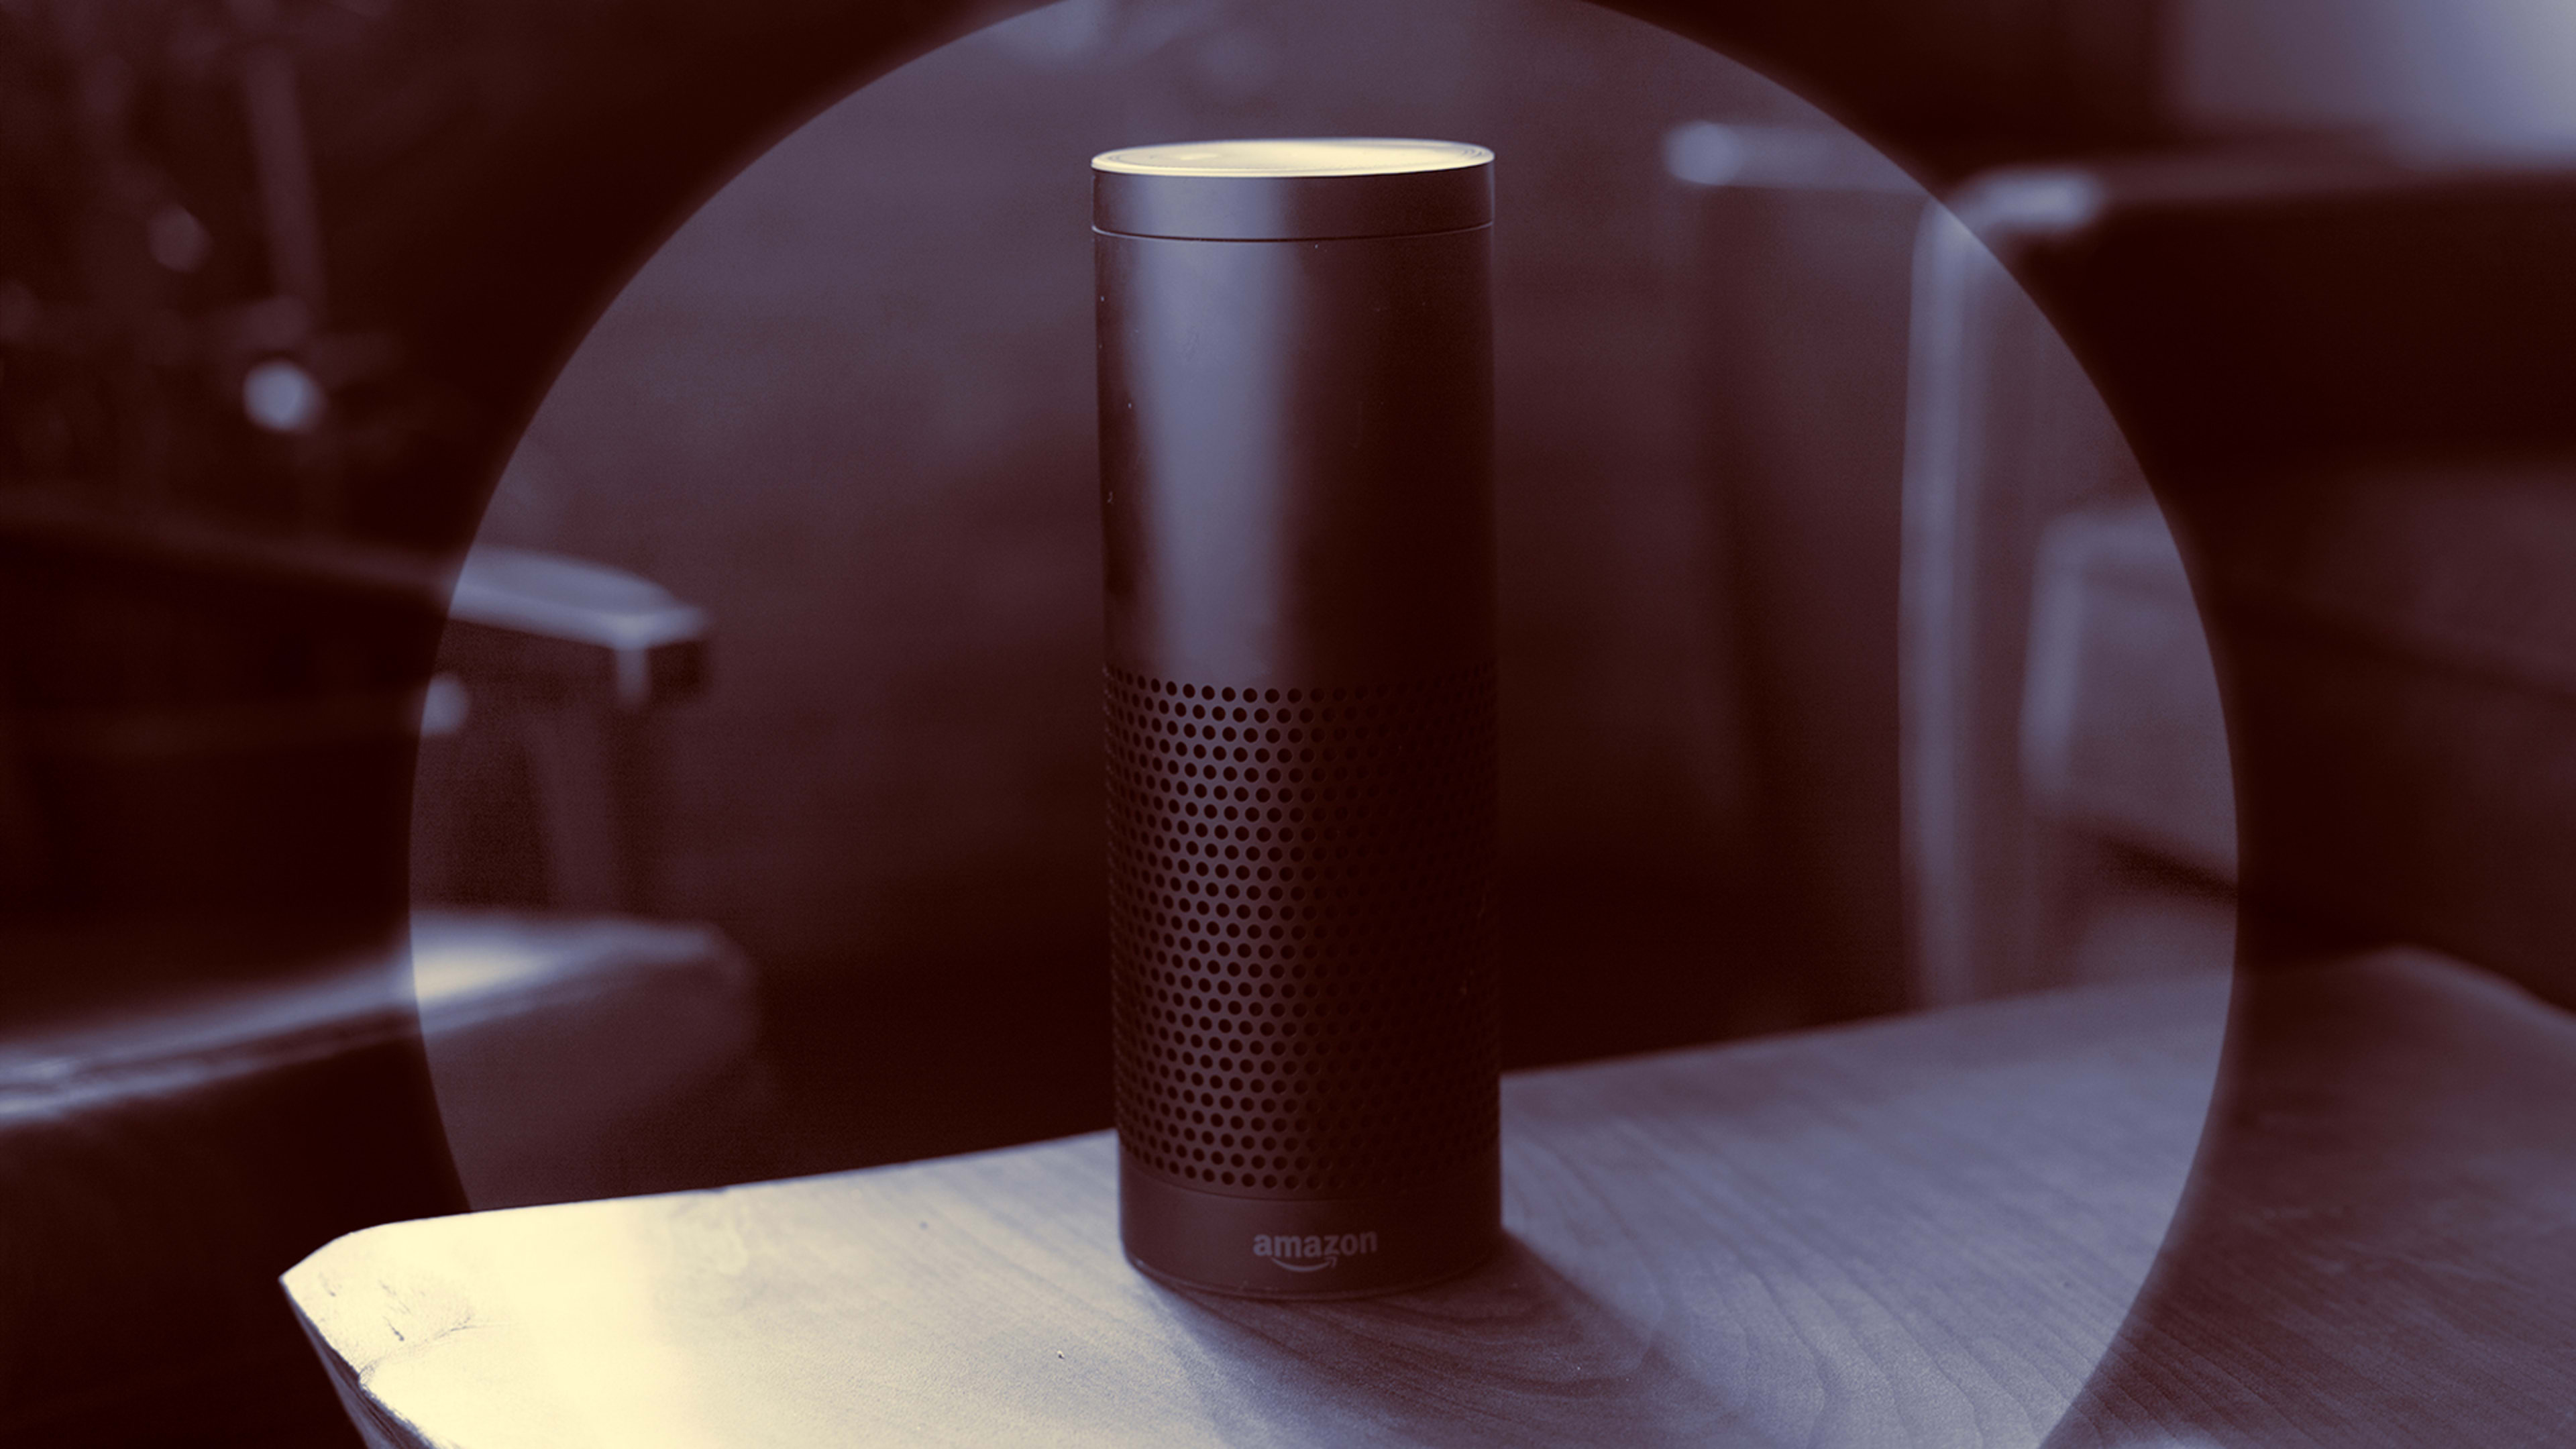 Amazon Alexa will now give medical advice from the NHS